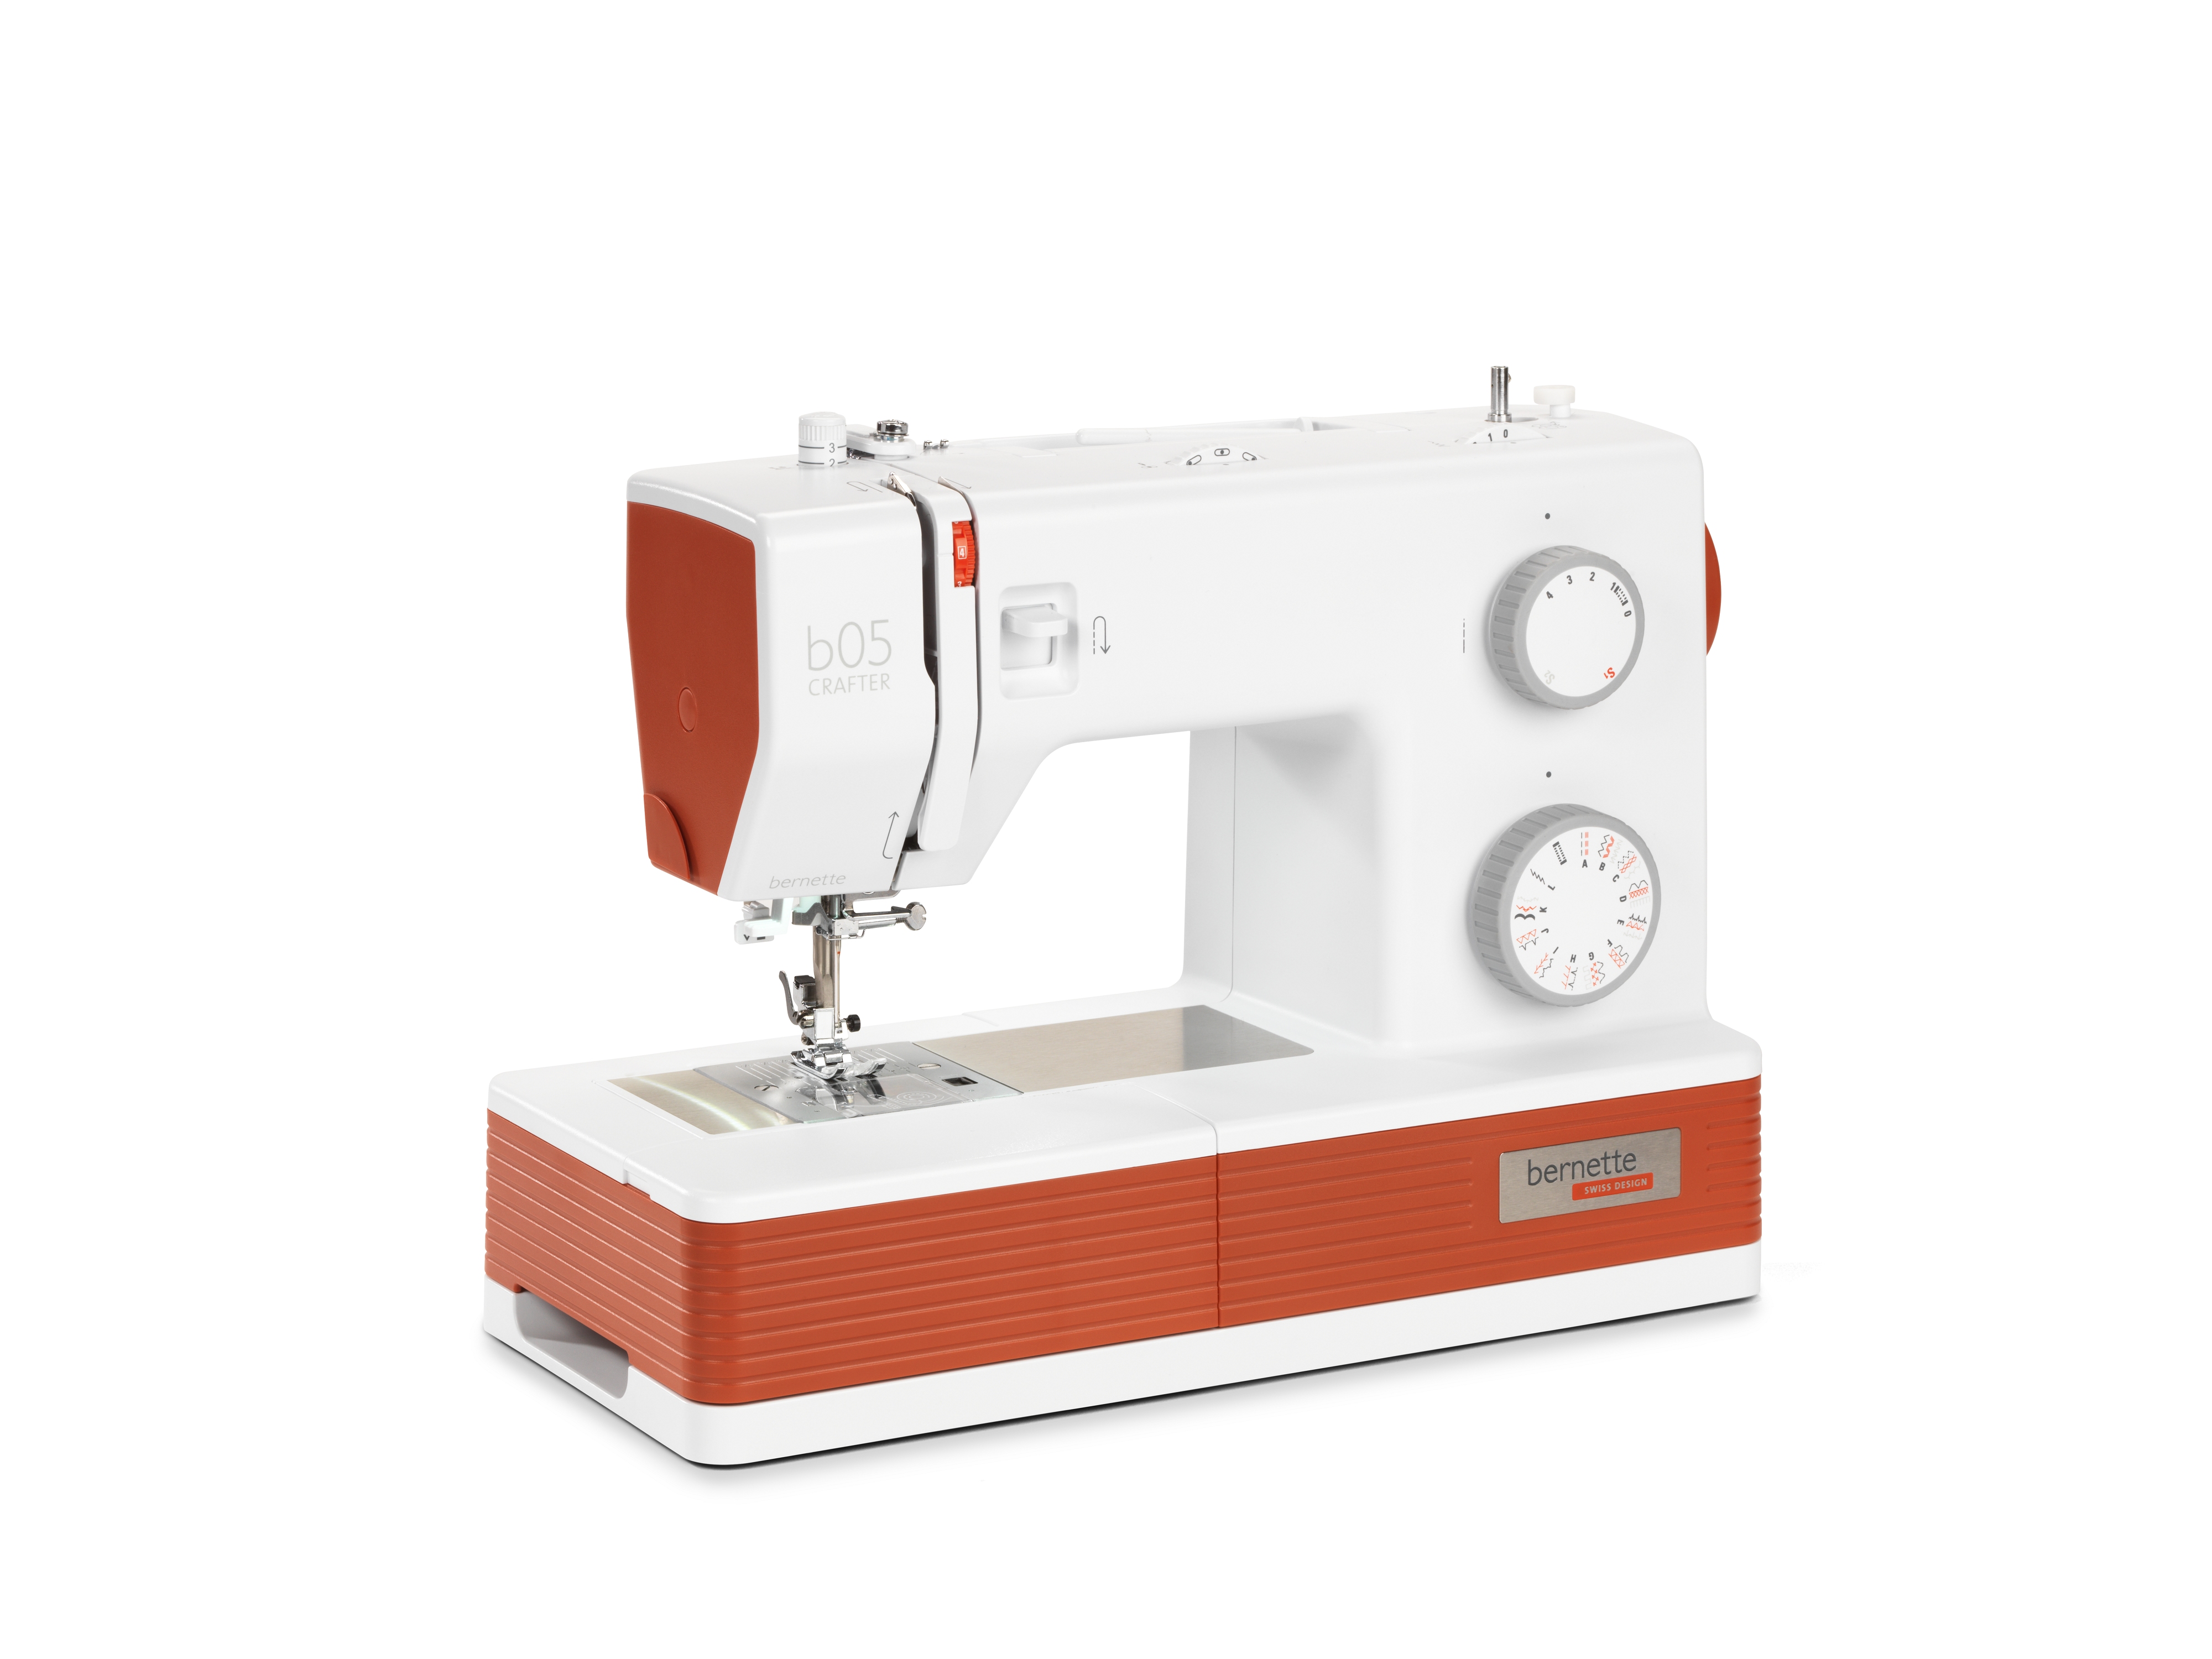 angled image of the Bernette b05 Crafter Sewing Machine